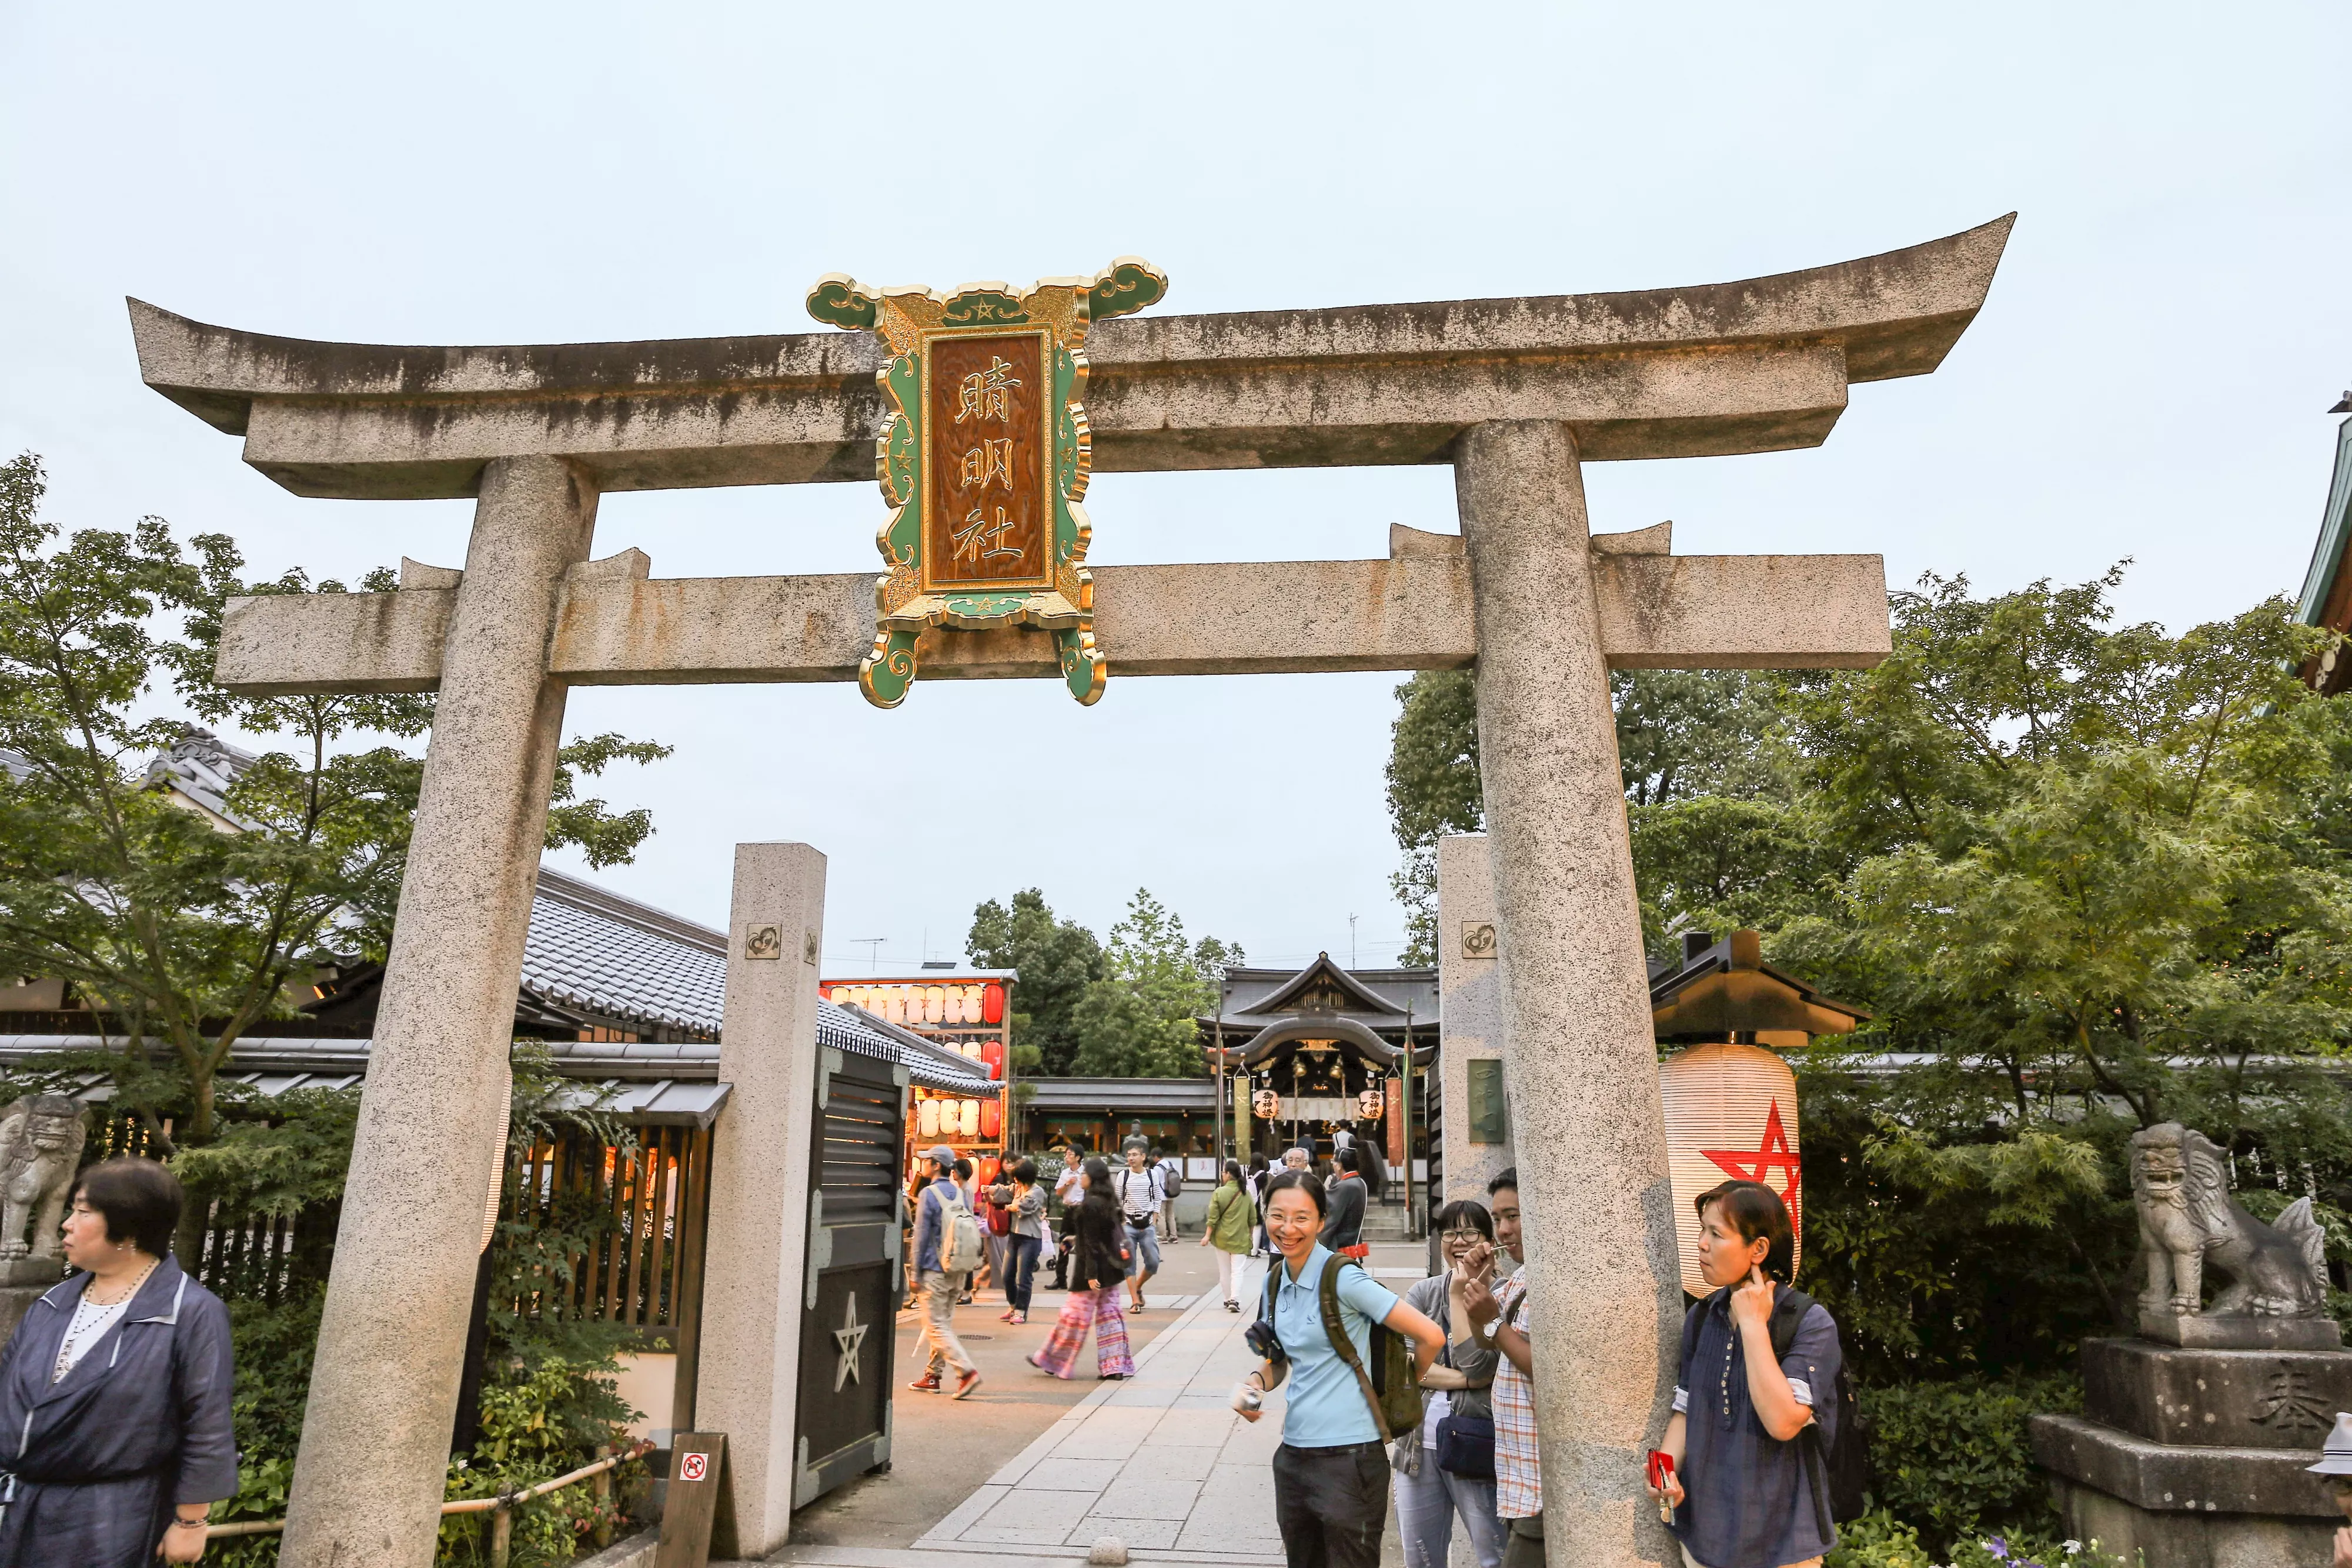 Seimei-Jinja Shrine in Japan, East Asia | Architecture - Rated 3.5